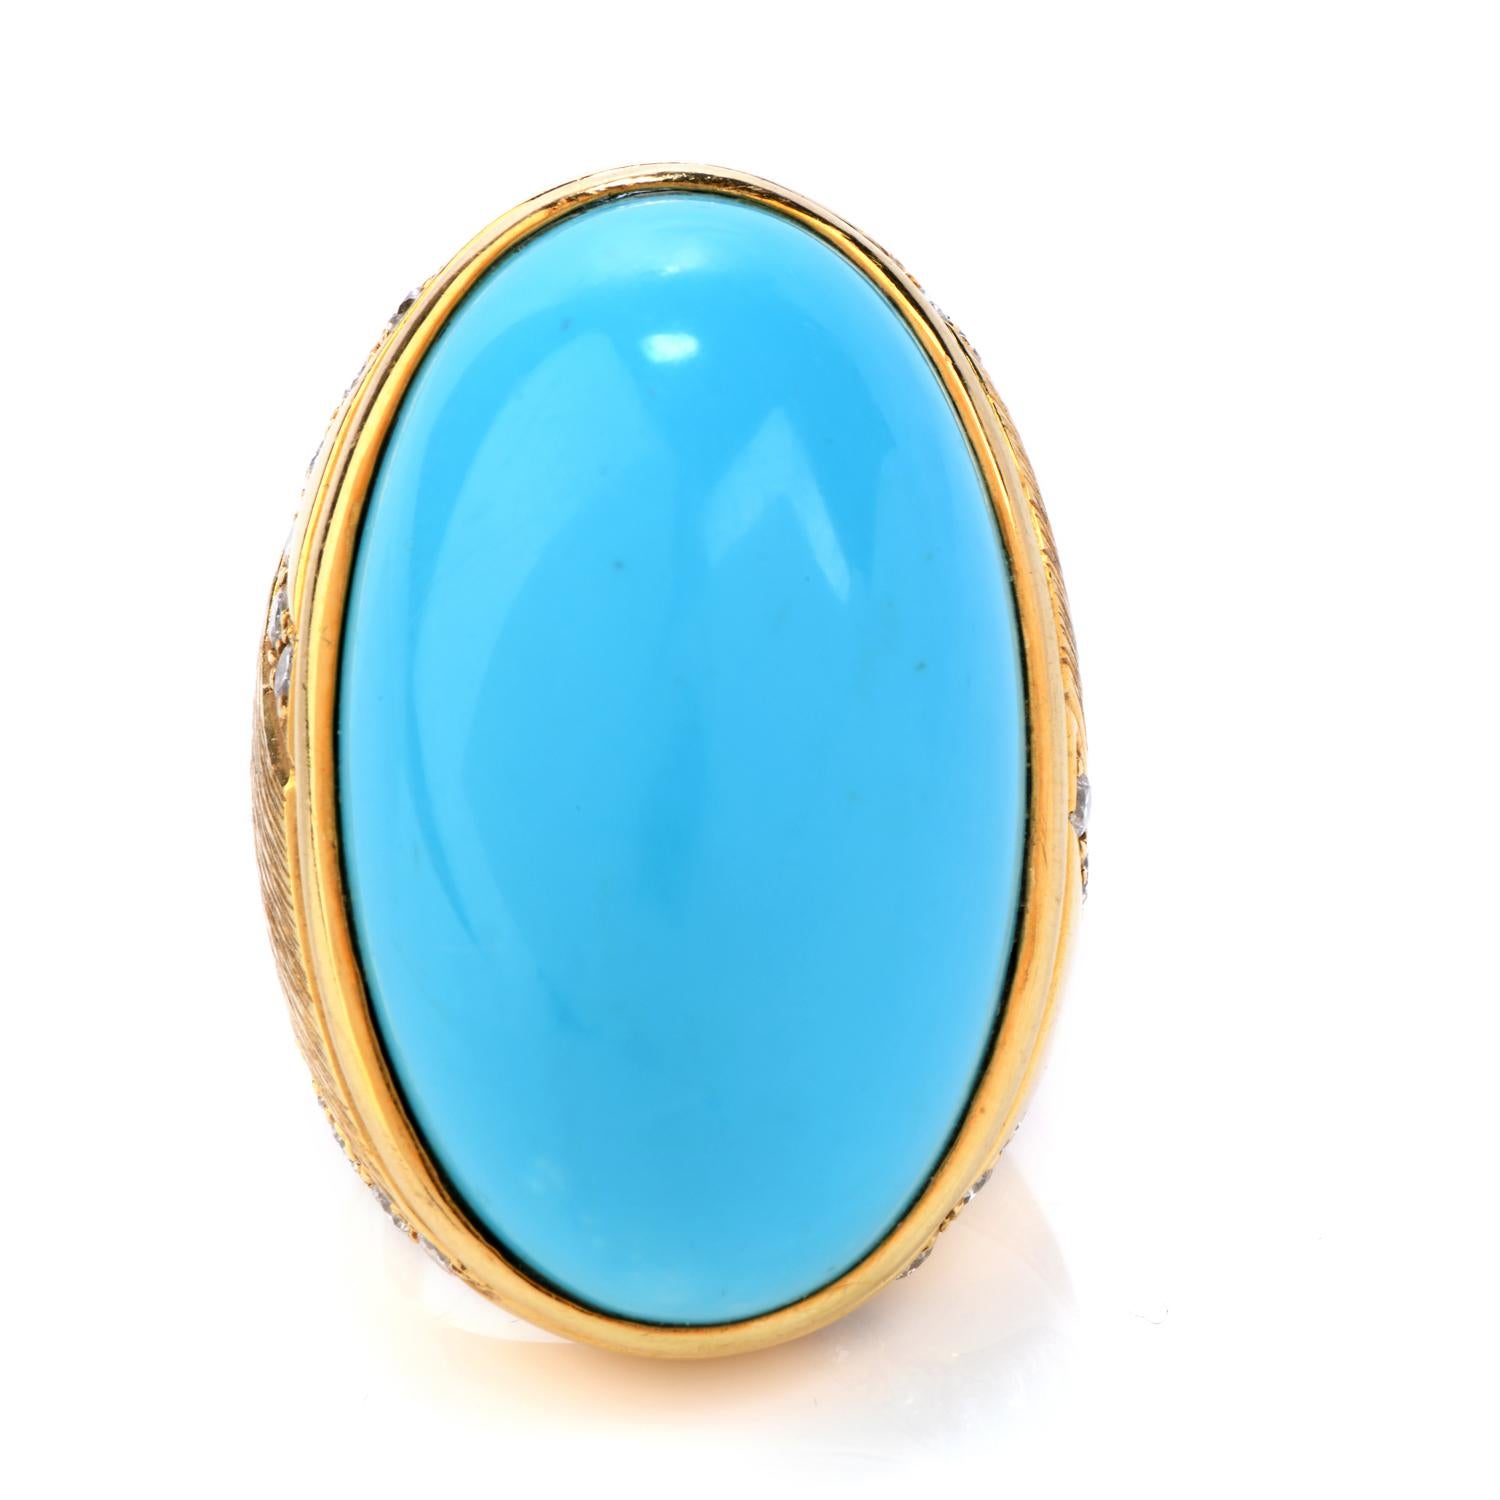 This Vintage awe-inspiring piece is truly a show stopper.

It is centered with a beautiful GIA certified oval cut Persian Turquoise of approximately 51.53 carats, measuring 32.75 x 19.80 x 10.90 mm, bezel set. This piece is crafted in solid fine 18K